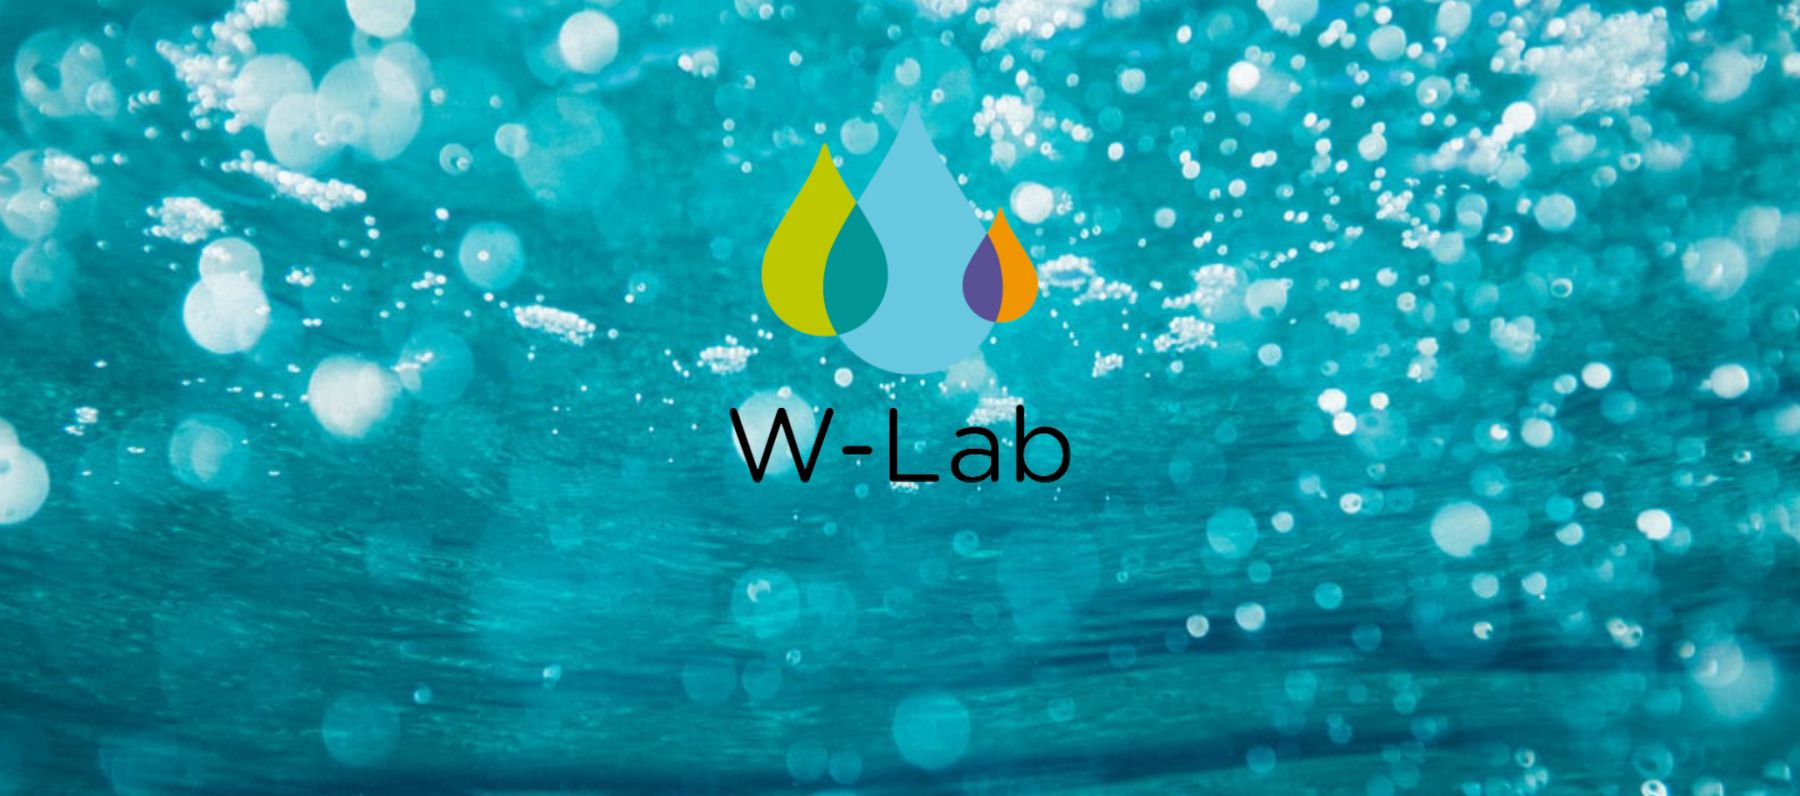 ThinkPlace is partnering with the WSAA and Isle Utilities to launch W-Lab